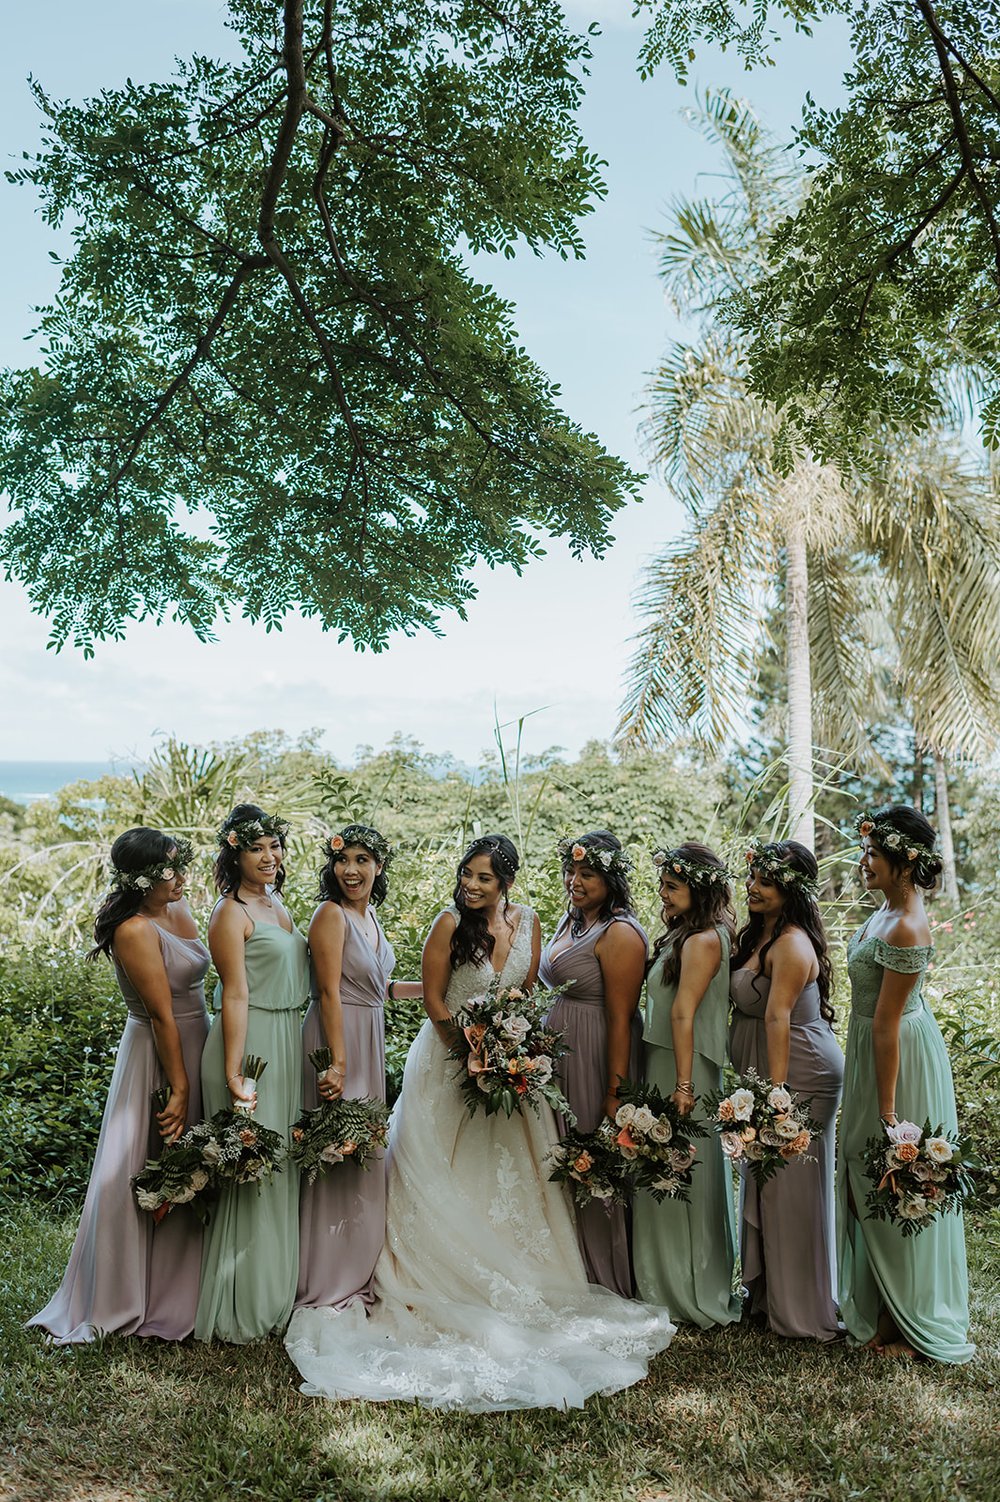 the best online shops to find the perfect bridesmaid dresses — for